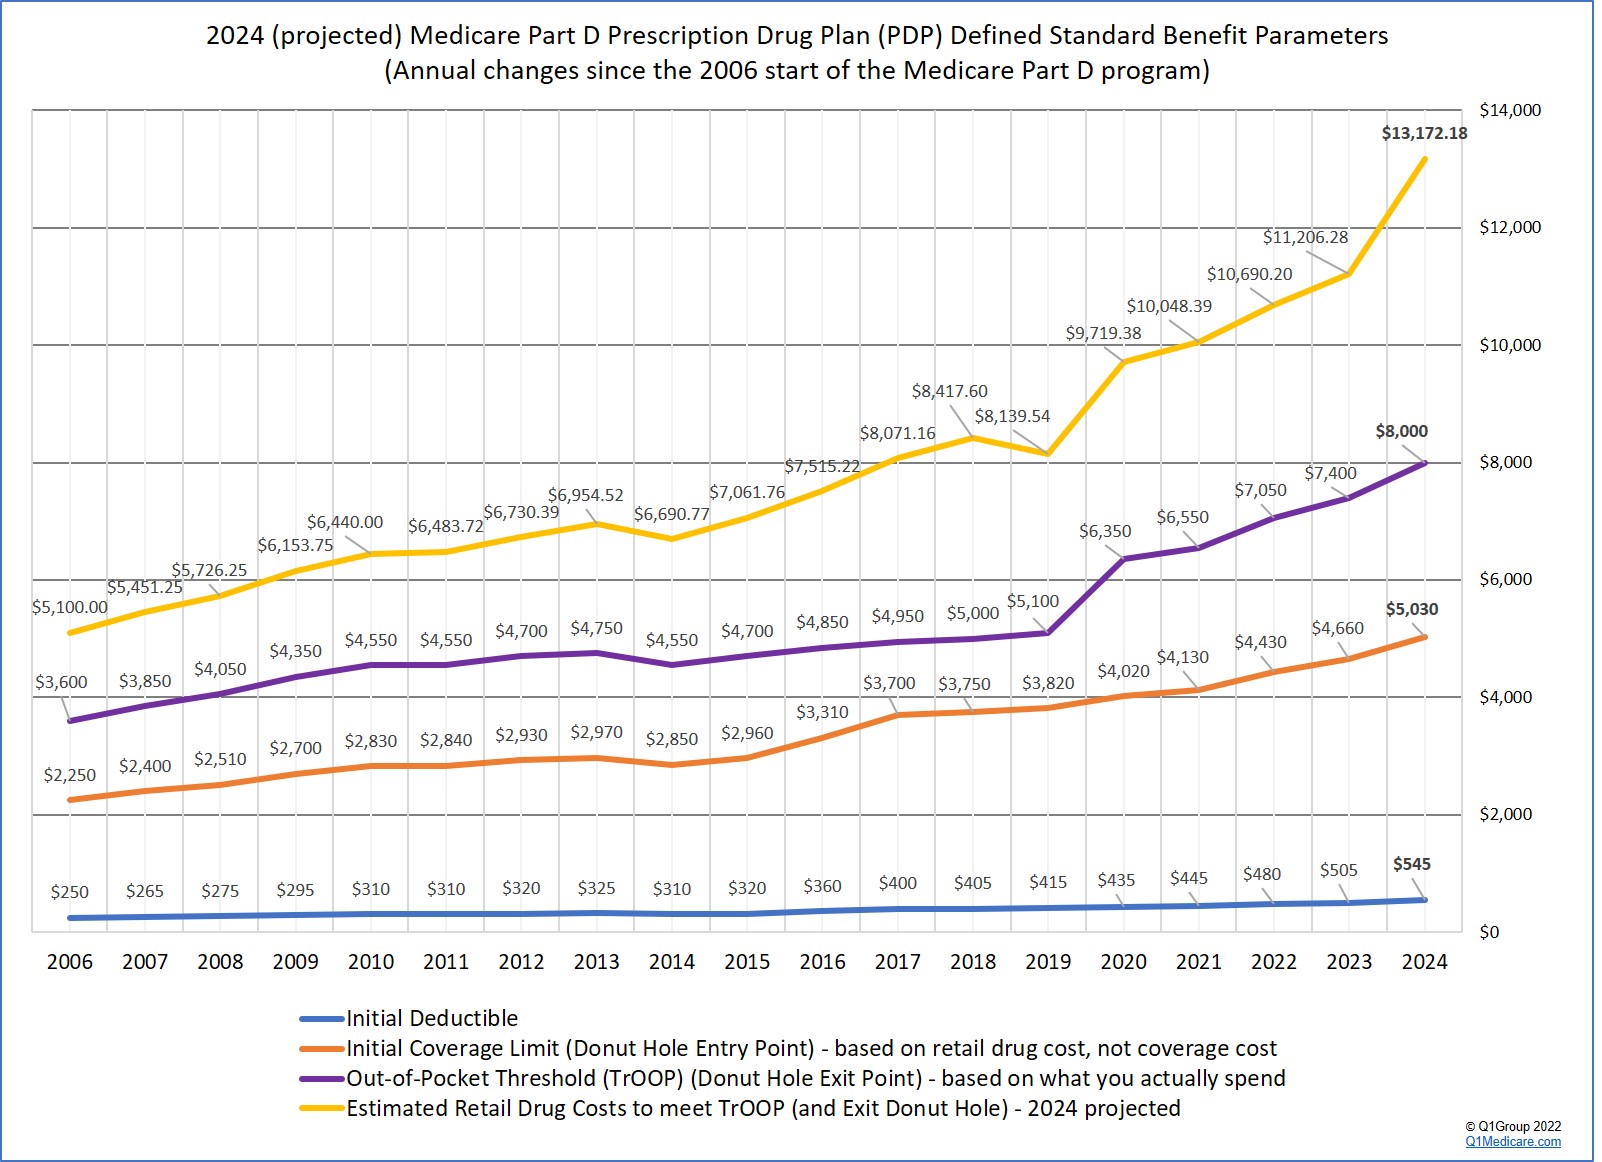 2024 Preliminary Medicare Part D defined standard benefit parameters -- annual changes since 2006